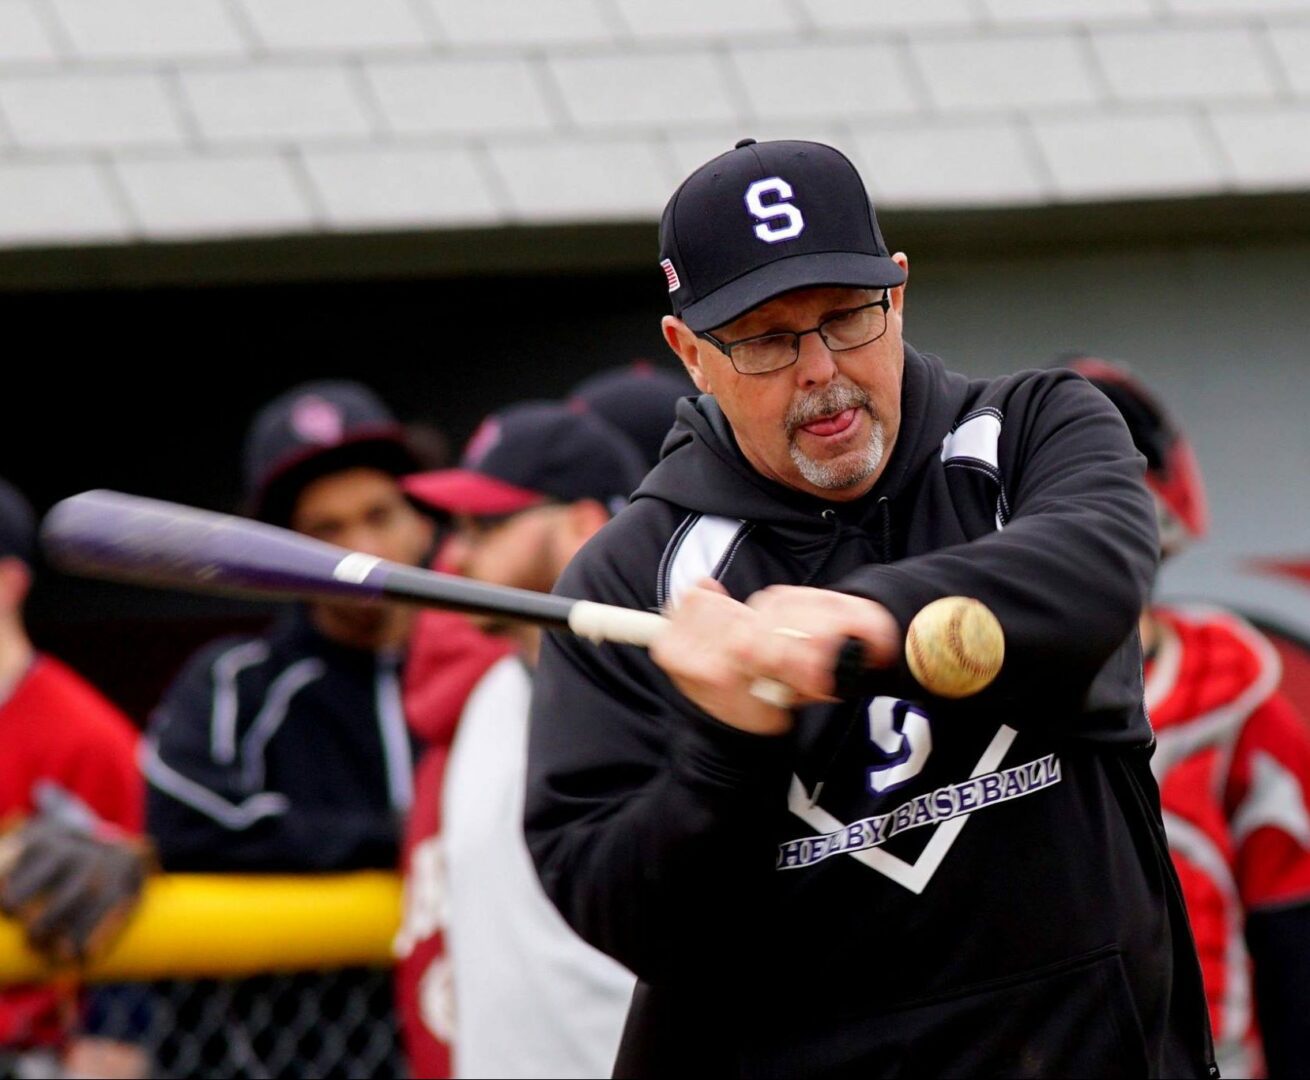 For Shelby baseball coach Brian Wright, there is no end in sight